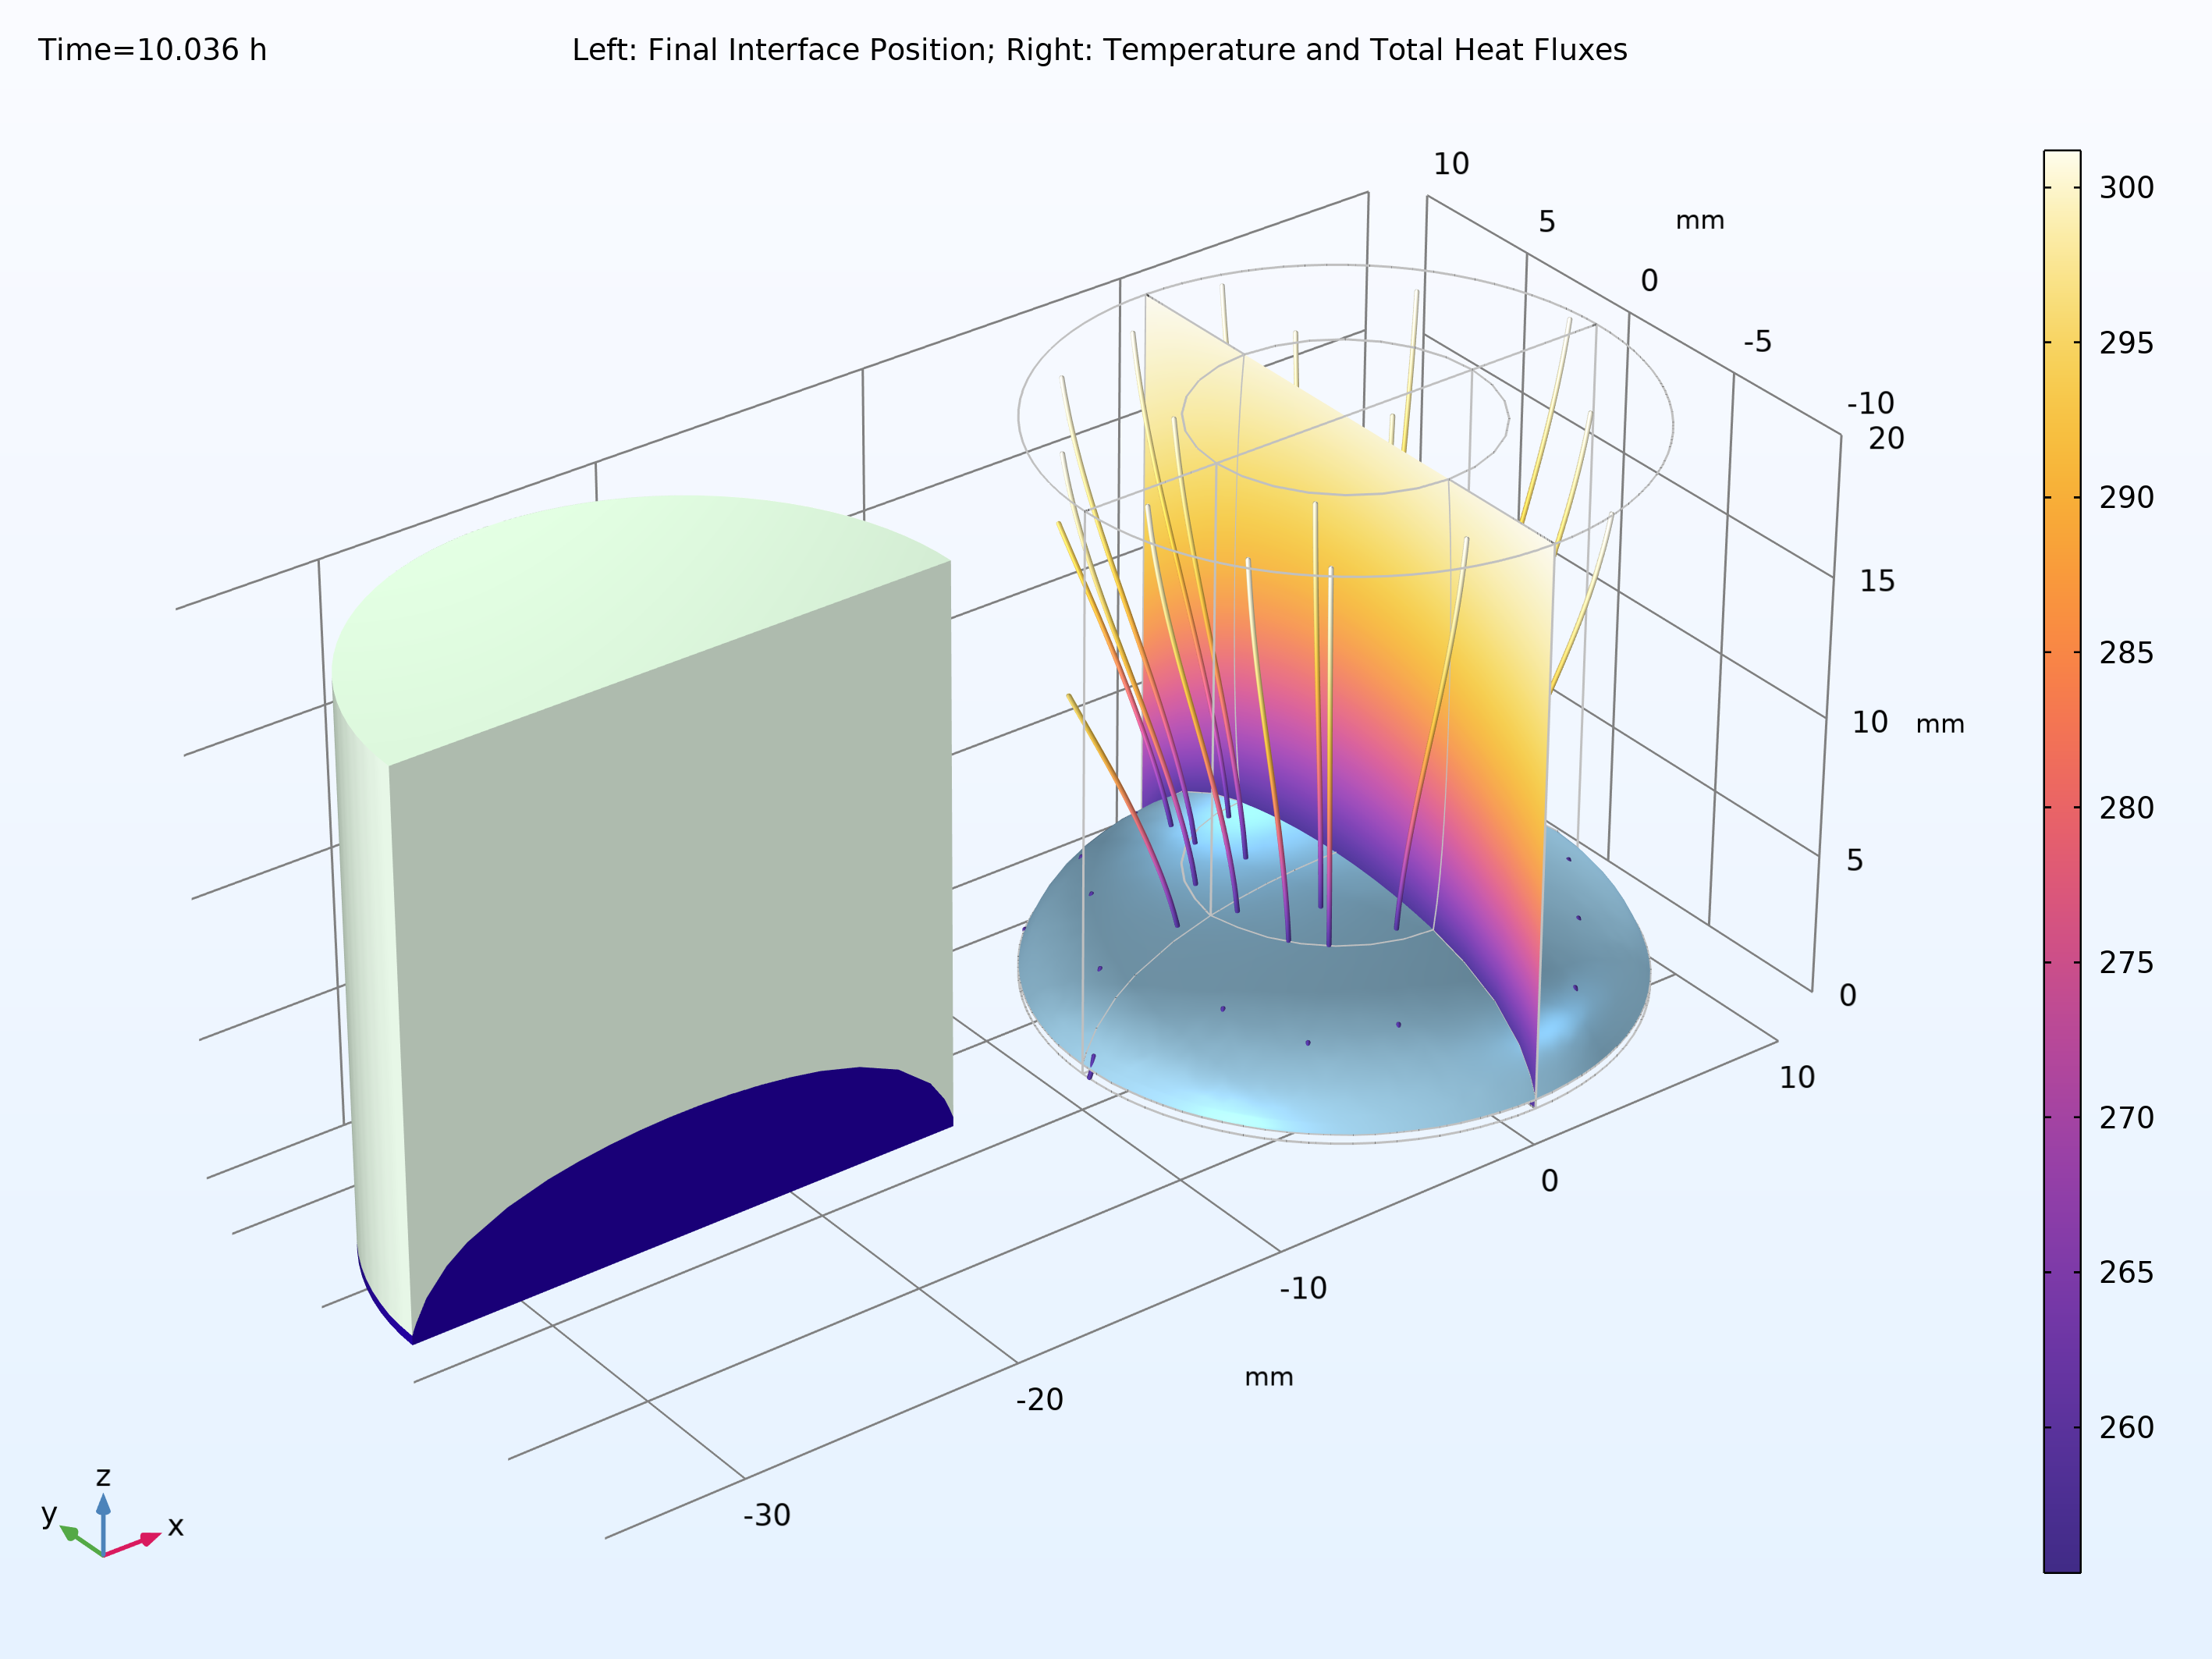 A simulation of the temperature and heat flux at the end of the freeze-drying process.